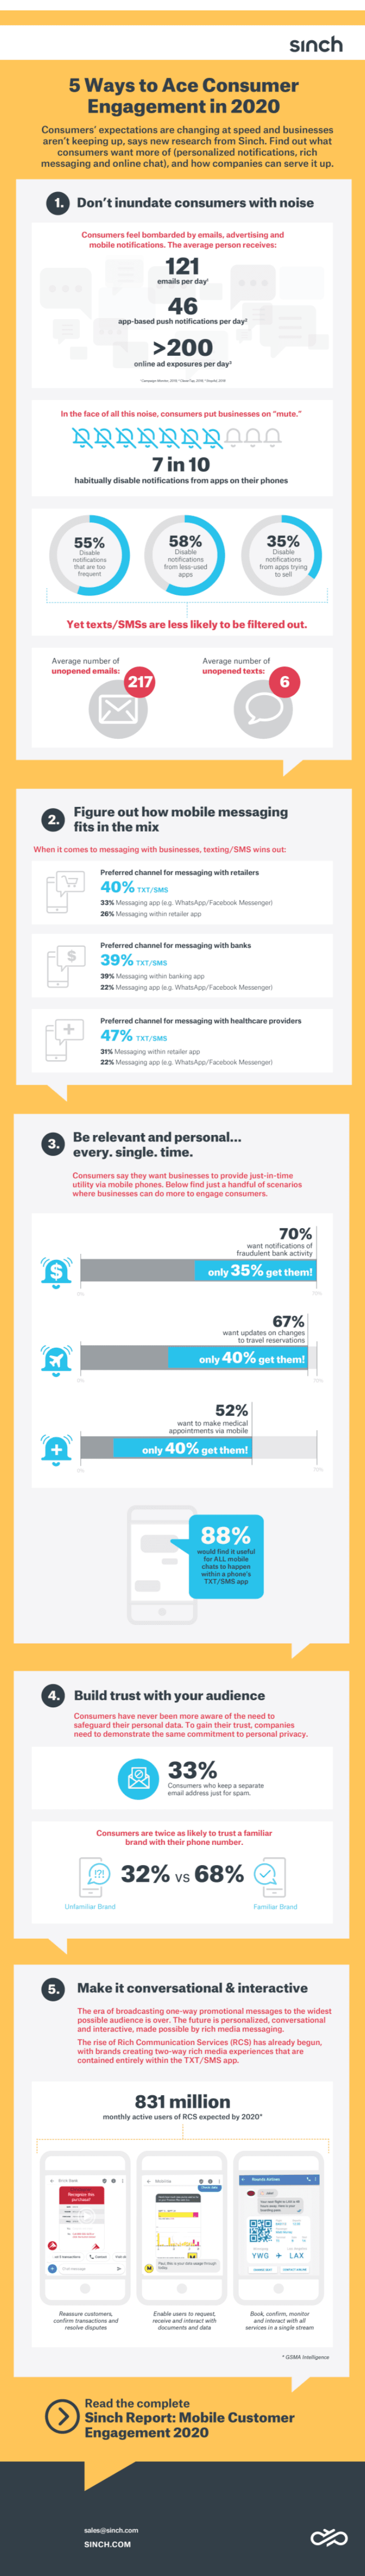 Infographic showing ways to increase customer engagement.